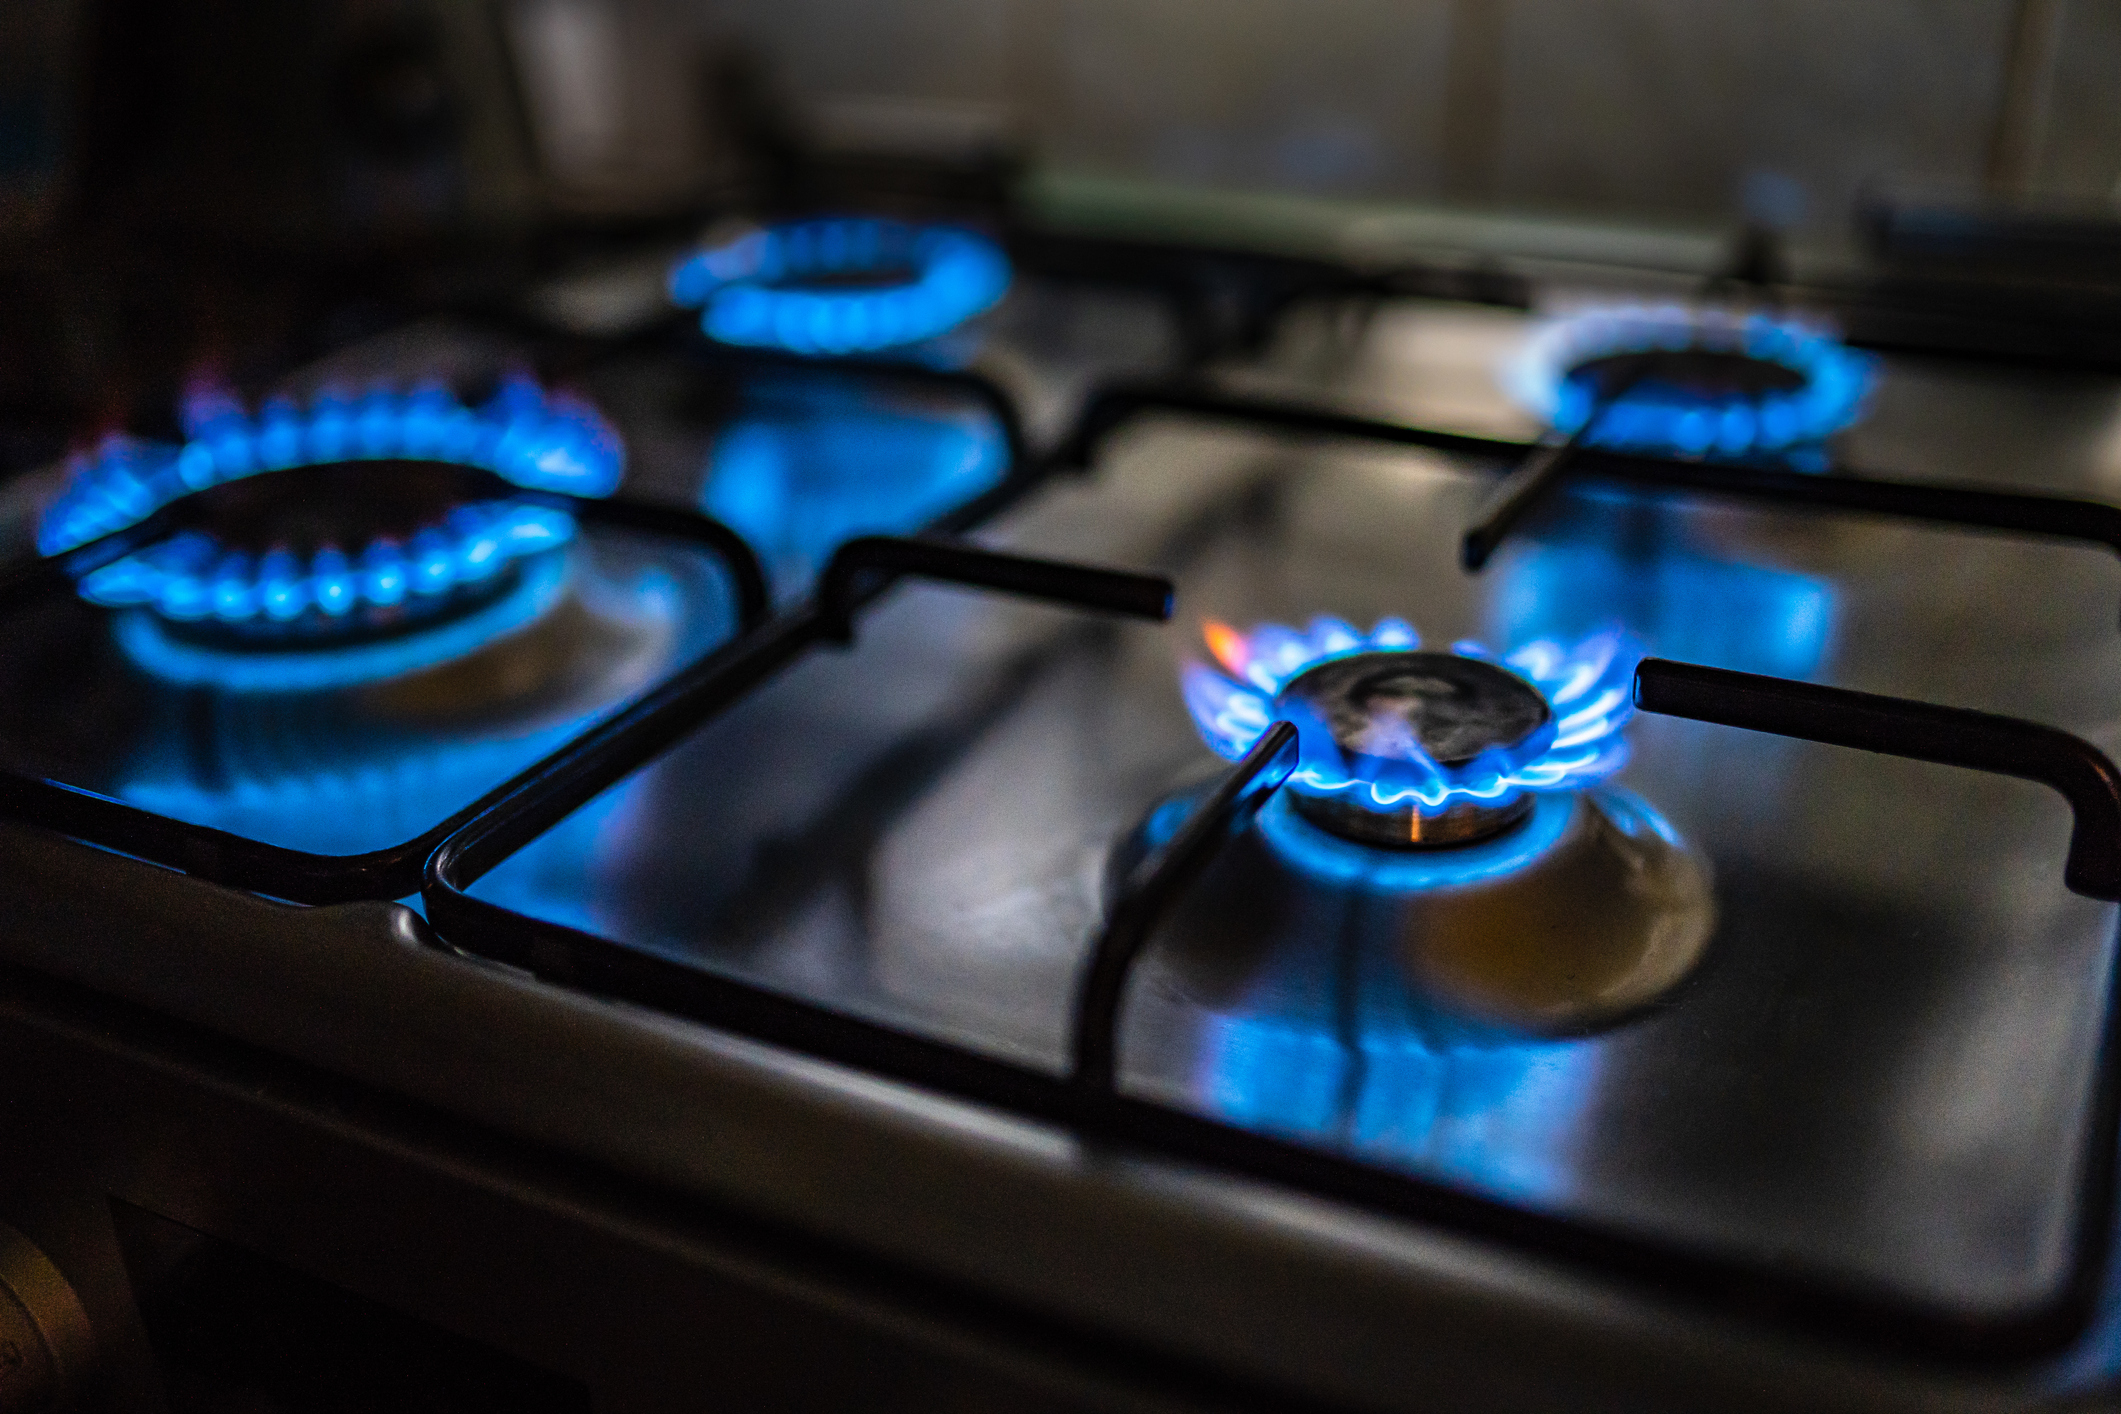 Gas burning stoves emit methane and nitrous oxides into homes and the atmosphere. (Getty Images/EyeEm)